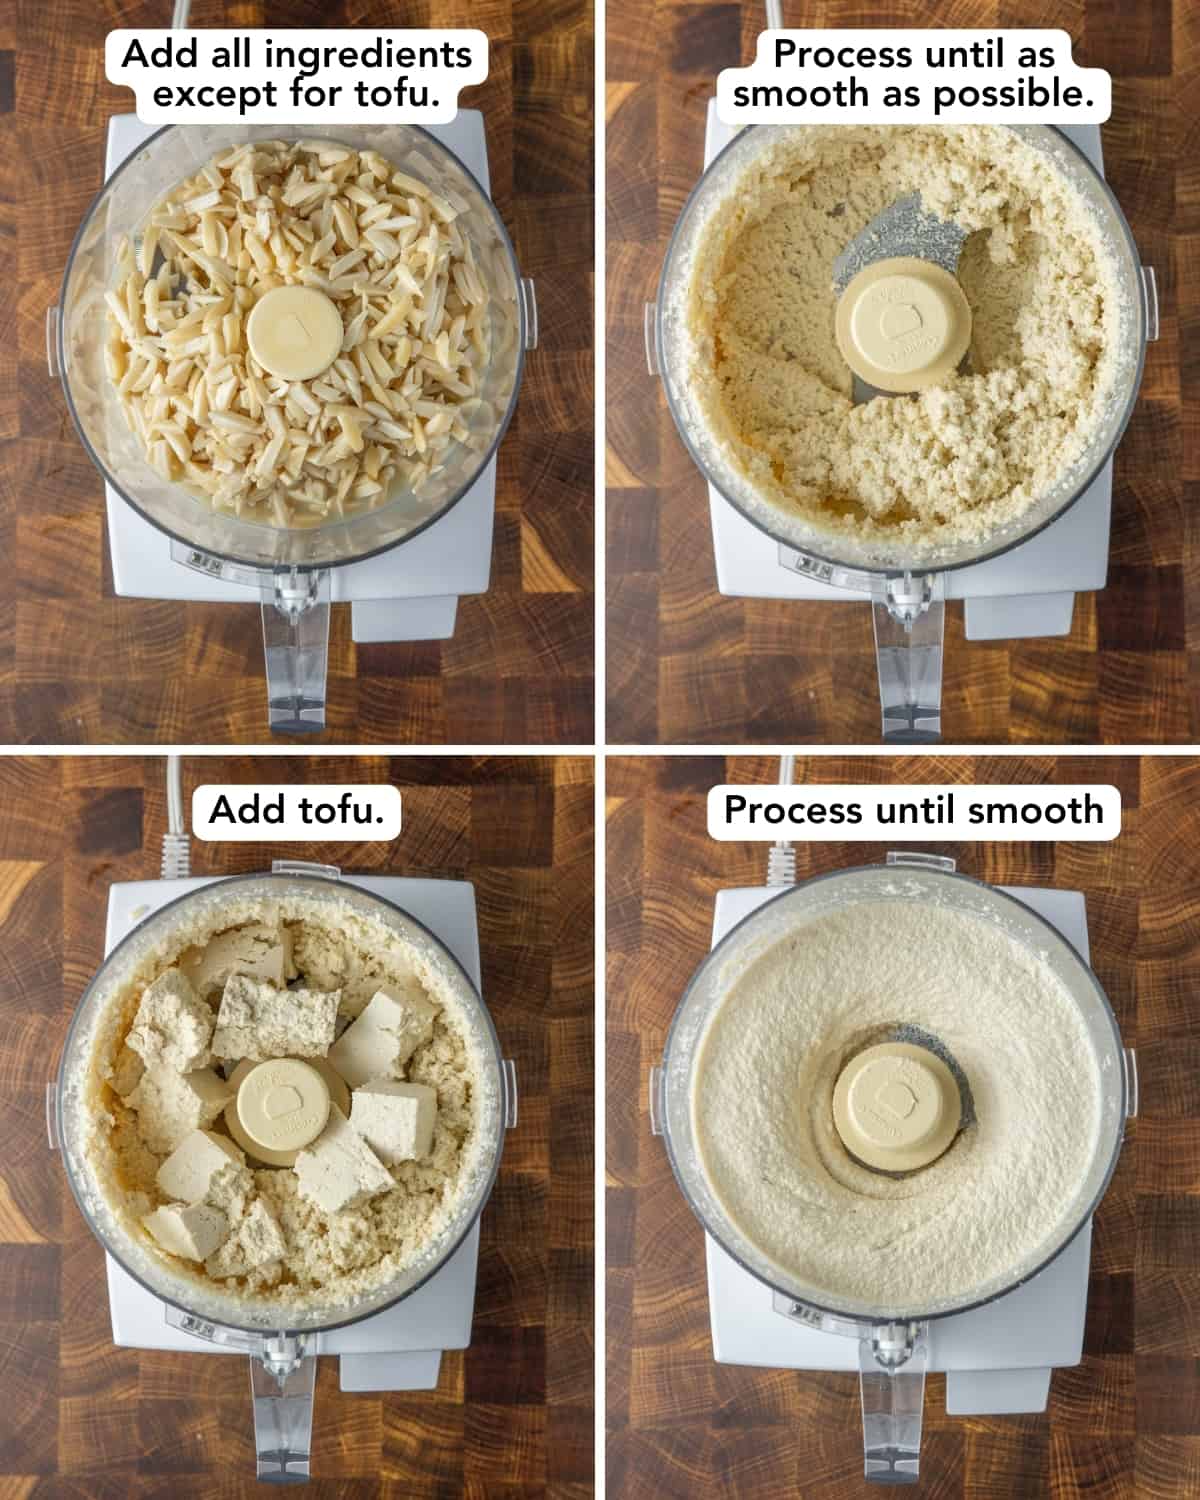 instructional images for how to make vegan ricotta